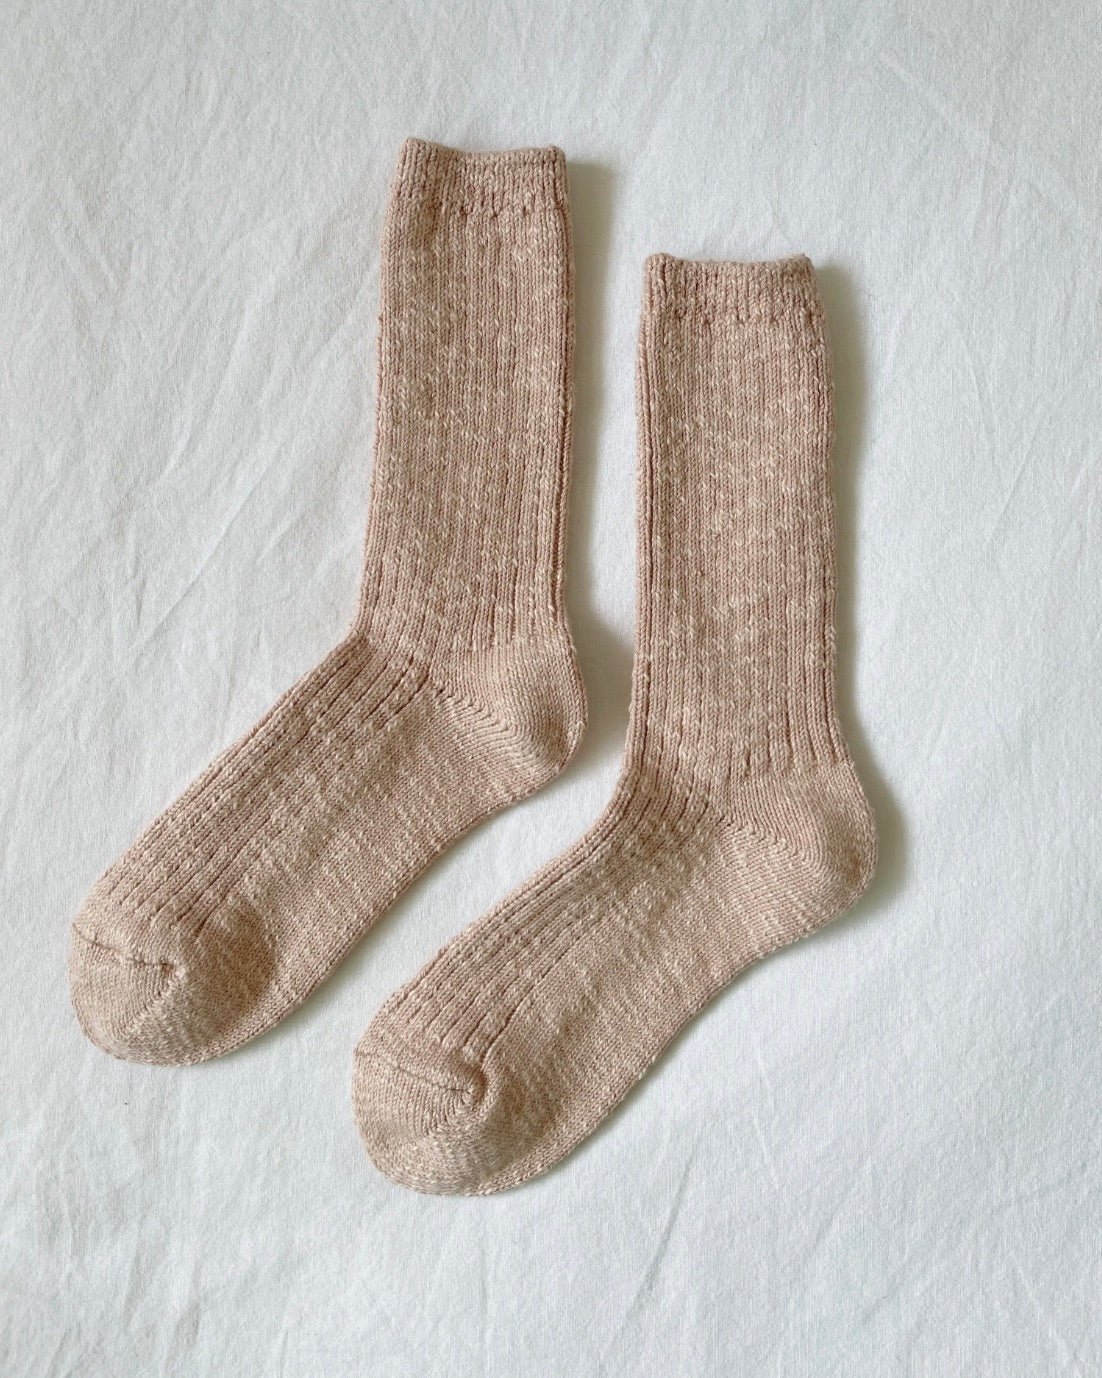 Le Bon Shoppe Cottage sock in color peachy keen on a white back ground